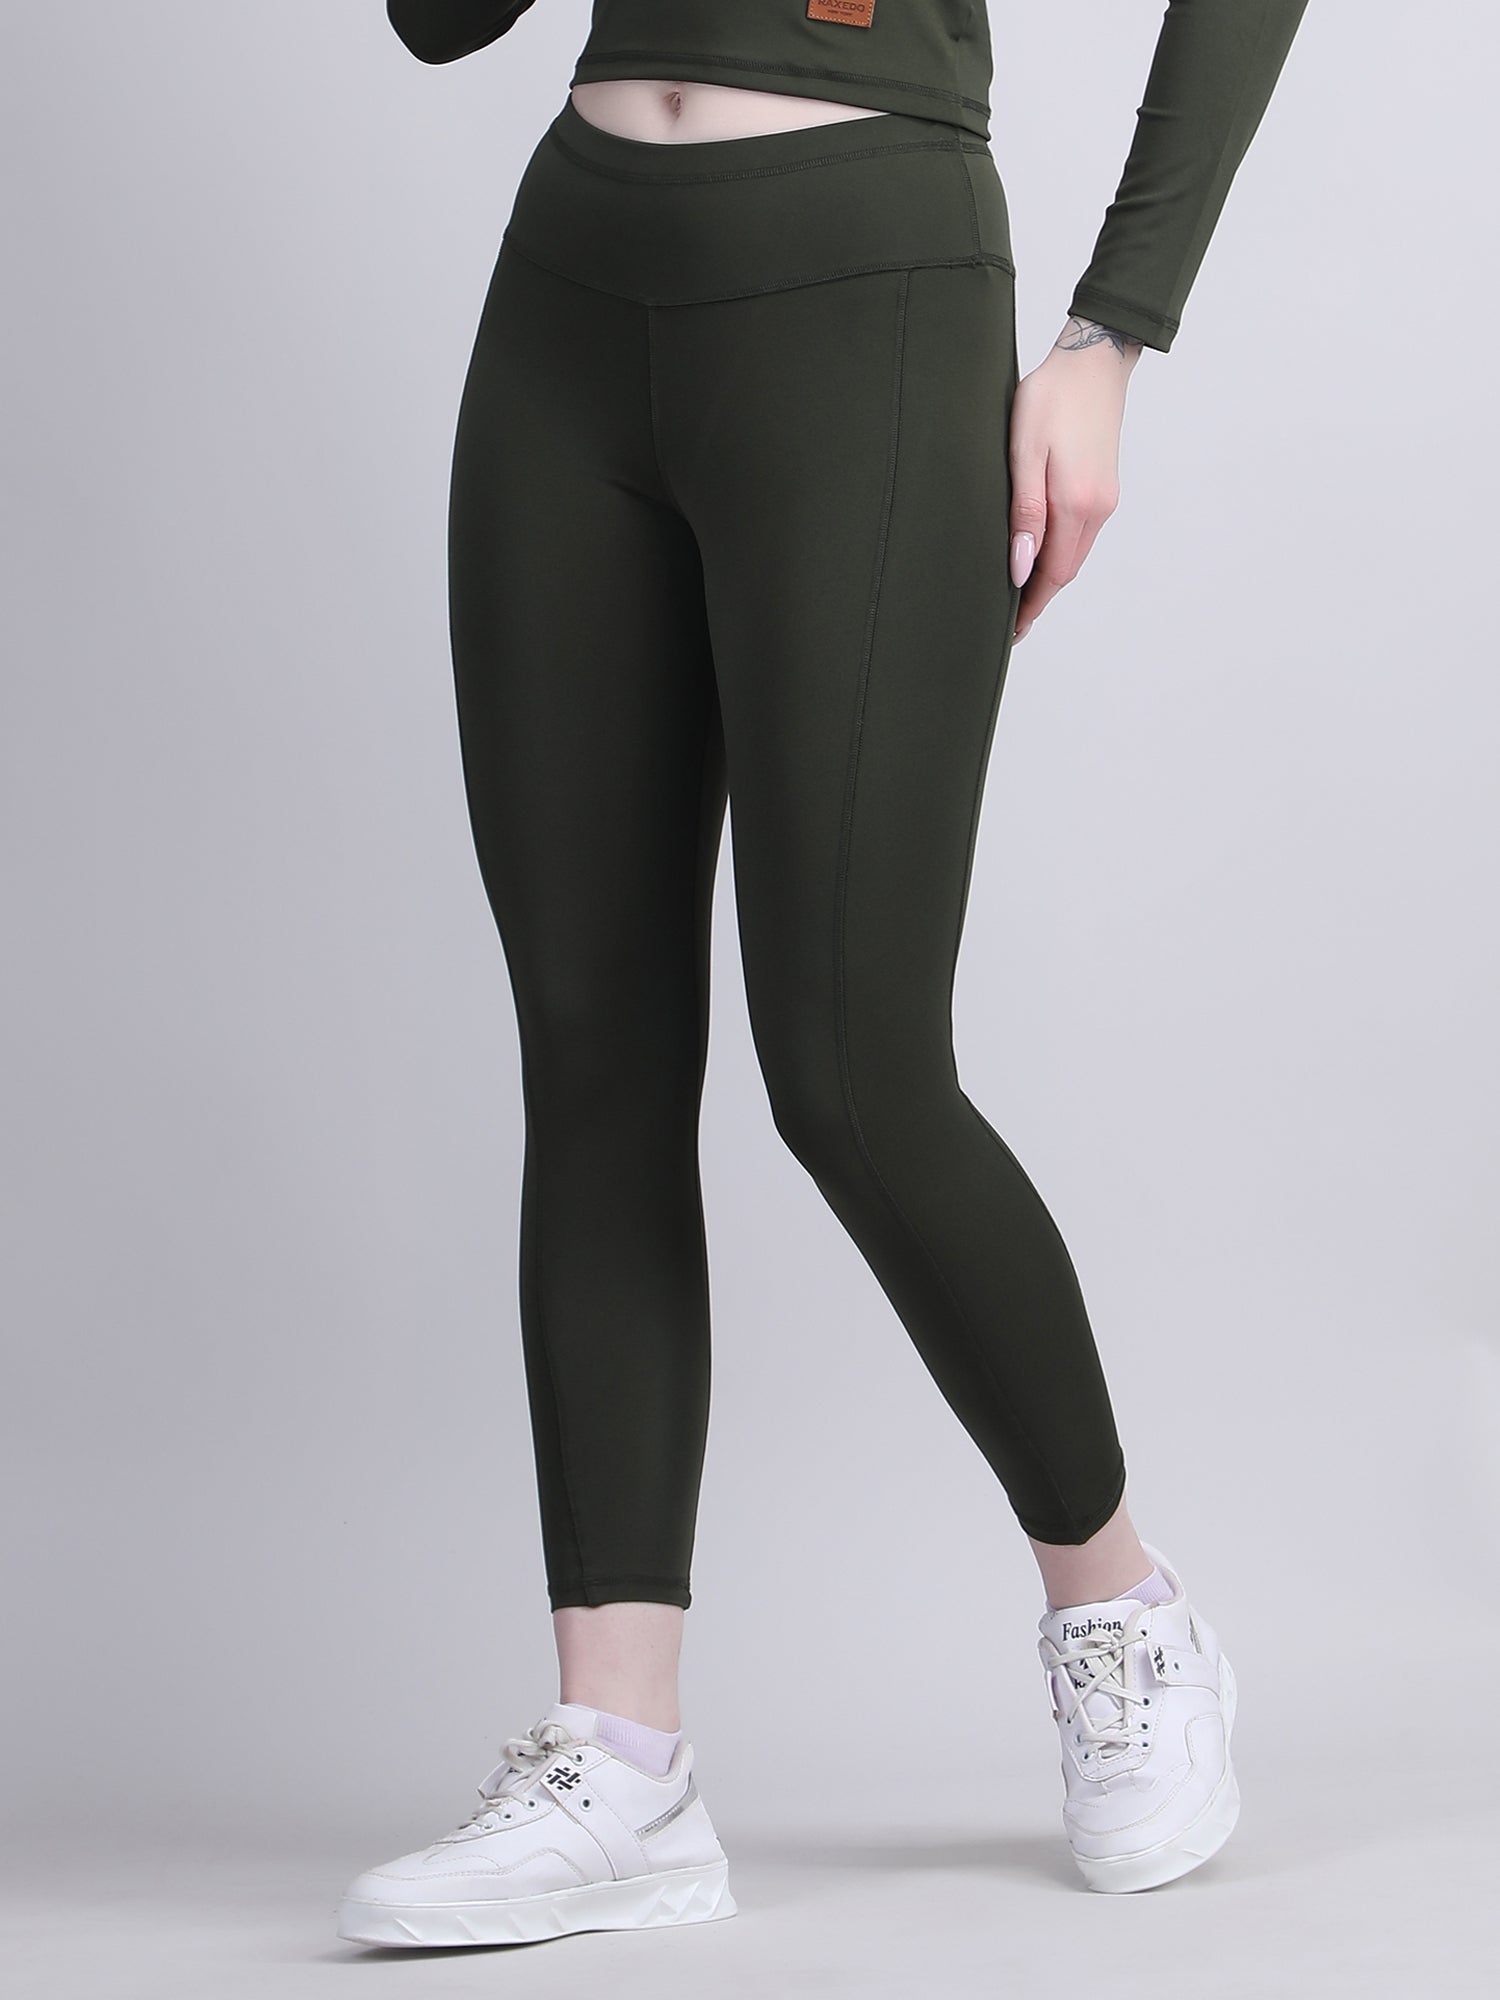 Women workout leggings with phone pocket